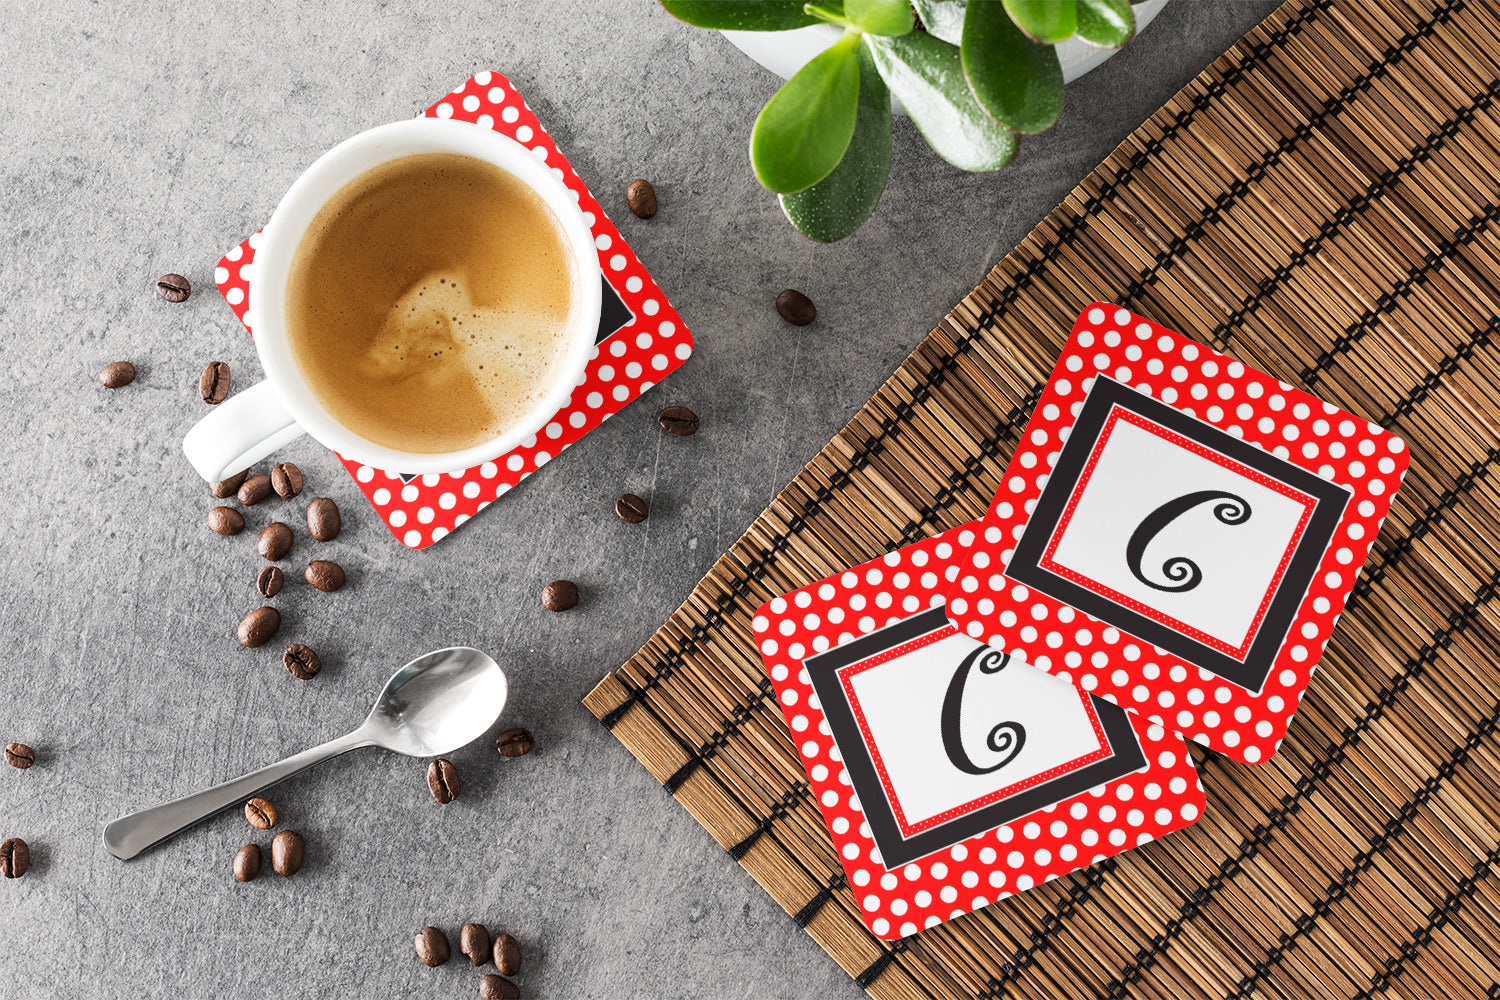 Set of 4 Monogram - Red Black Polka Dots Foam Coasters Initial Letter C - the-store.com